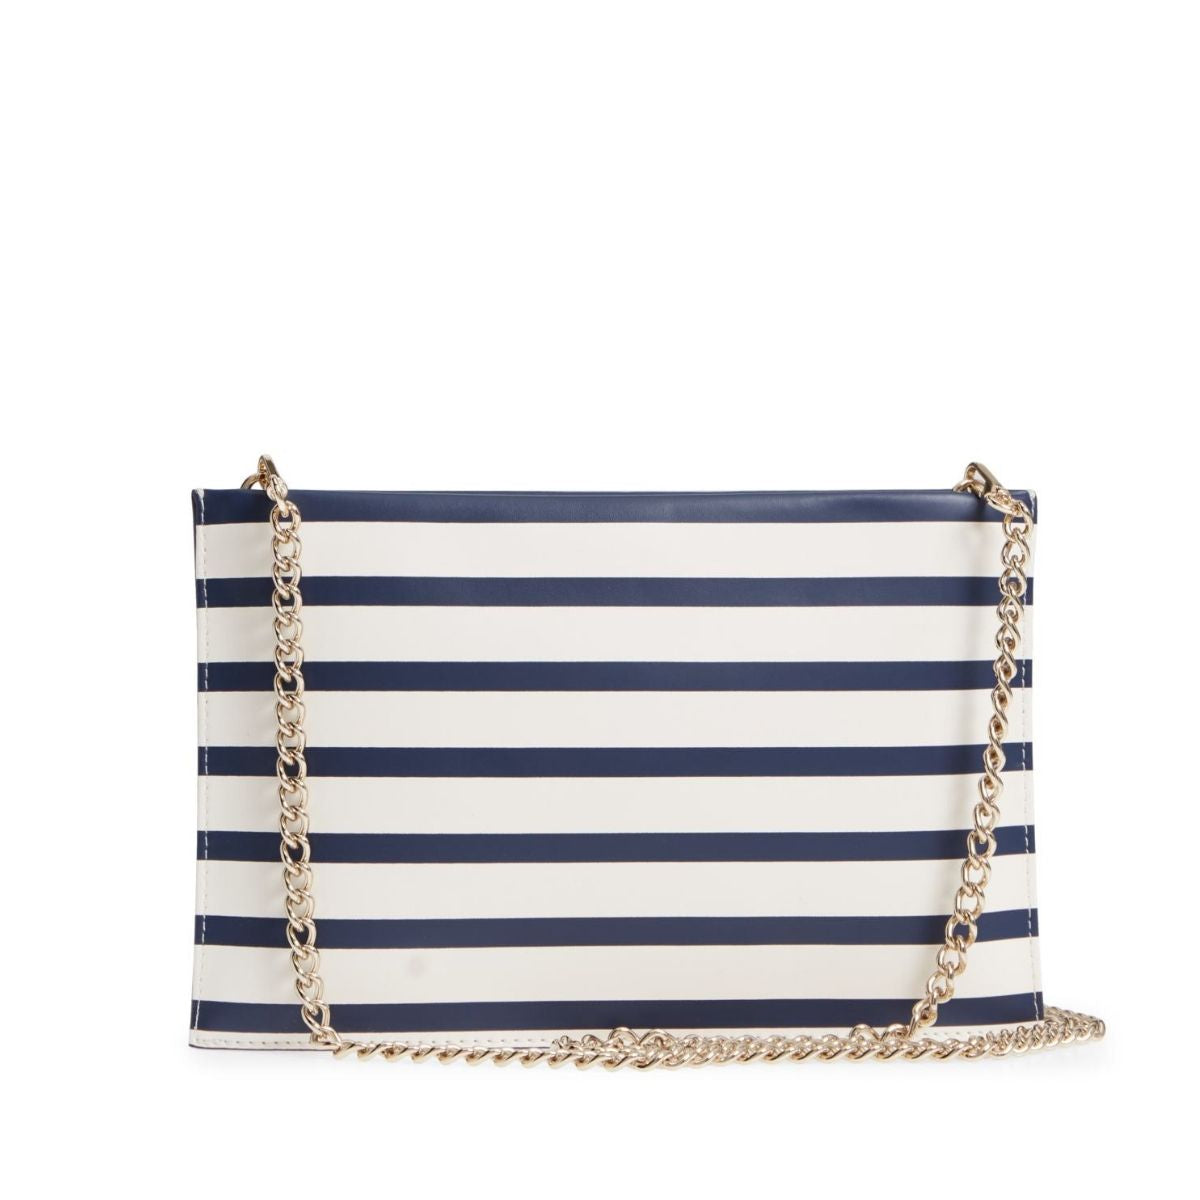 Kate Spade Navy Blue Crossbody Purse Bag Clutch for Sale in